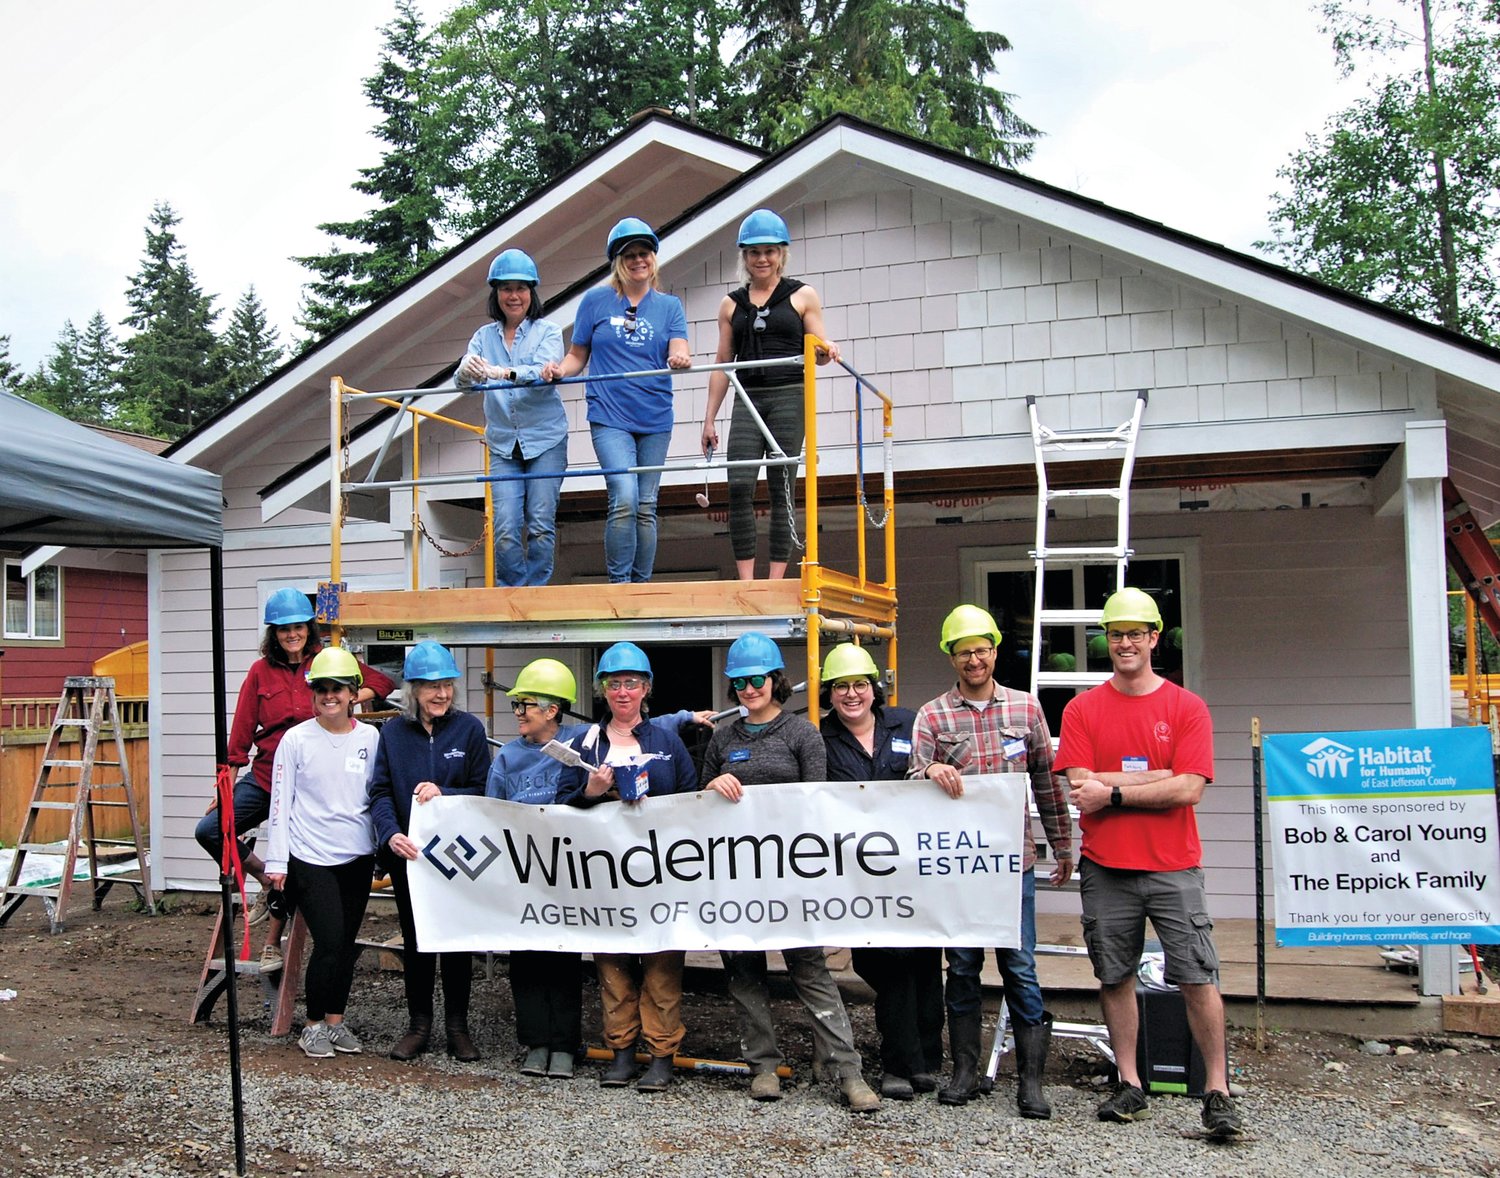 Employees with Windmere Real Estate’s Port Townsend, Port Ludlow, and Quilcene offices volunteered for Windermere’s Community Service Day on June 10 to help paint a house with Habitat for Humanity.